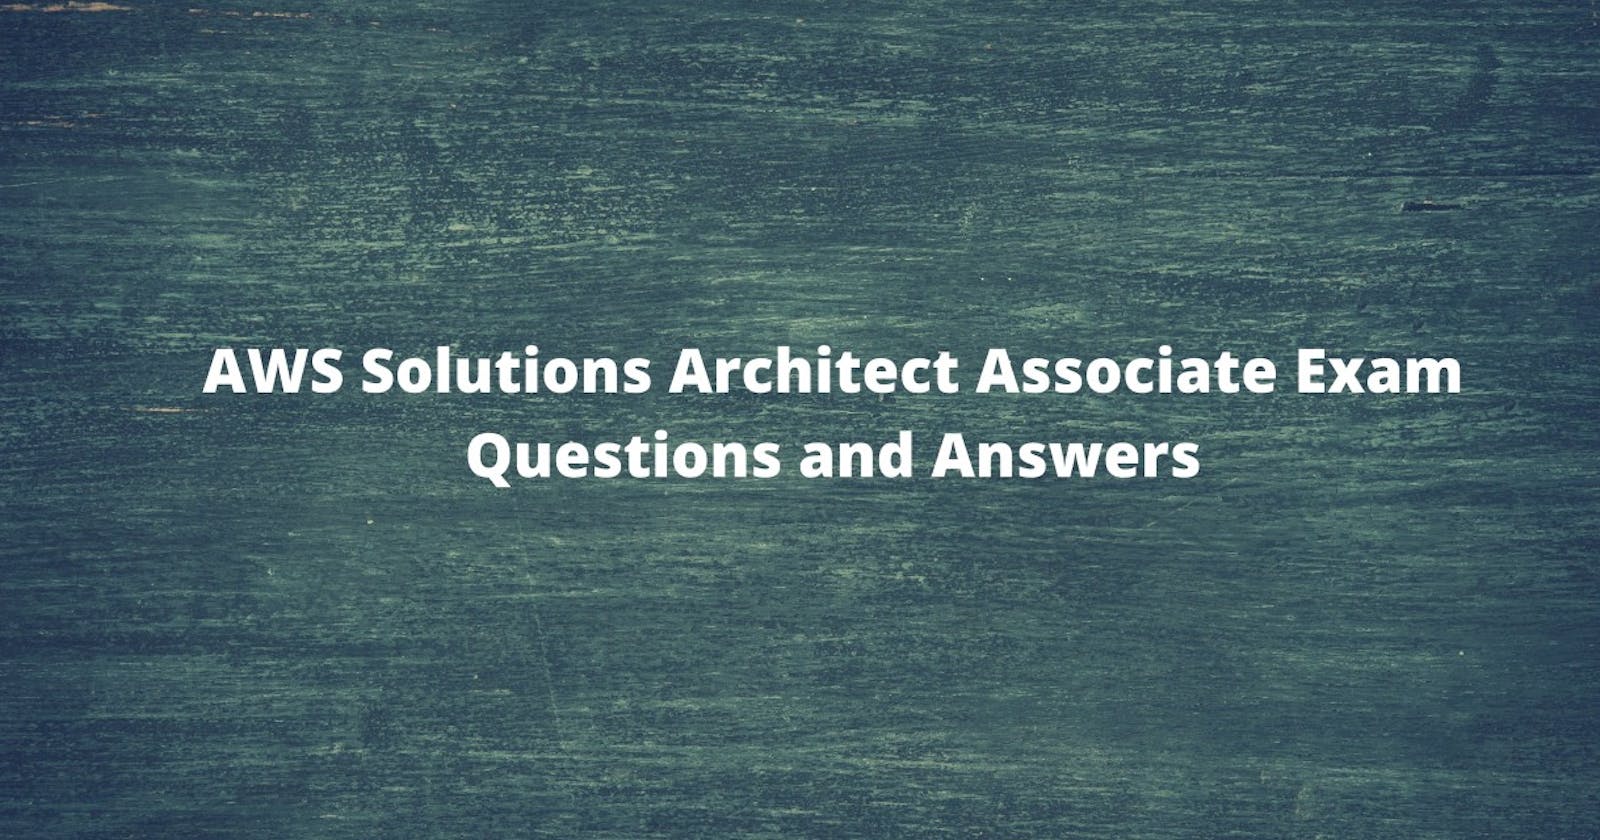 AWS Solutions Architect Associate Exam Questions and Answers